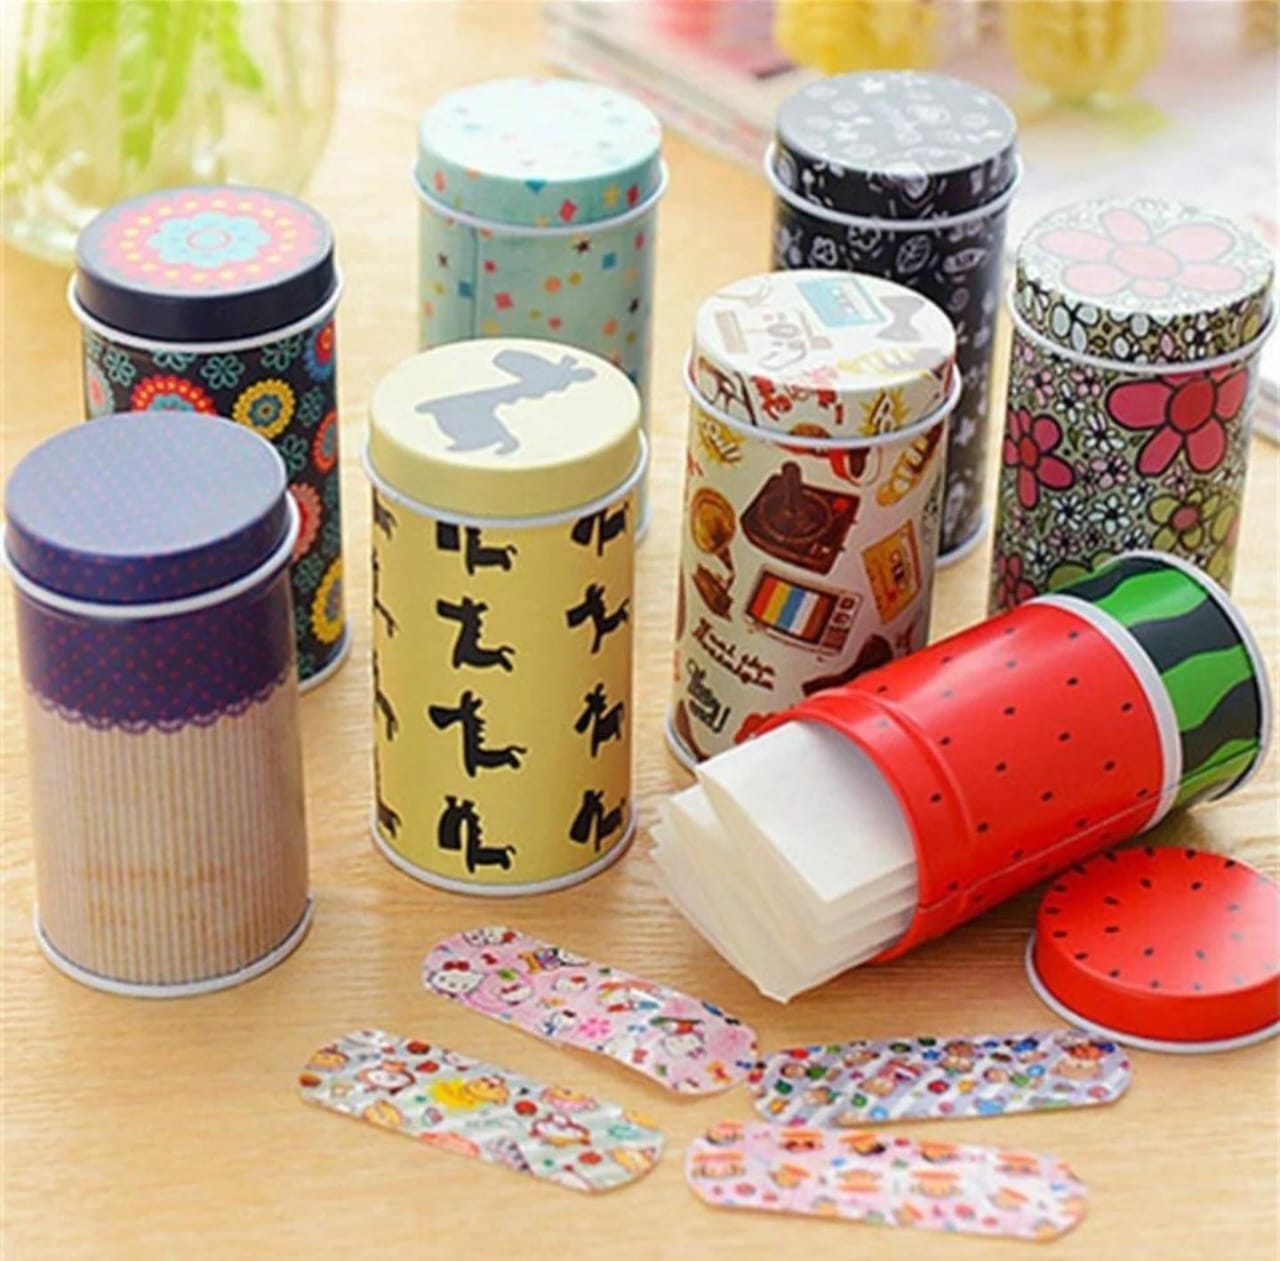 jags-mumbai Metal Box Mini Cylindrical Round Metal Tin Box - A Gift and Storage Solution for Small Treasures( 8X4 CM )-Contain 1 Unit tin